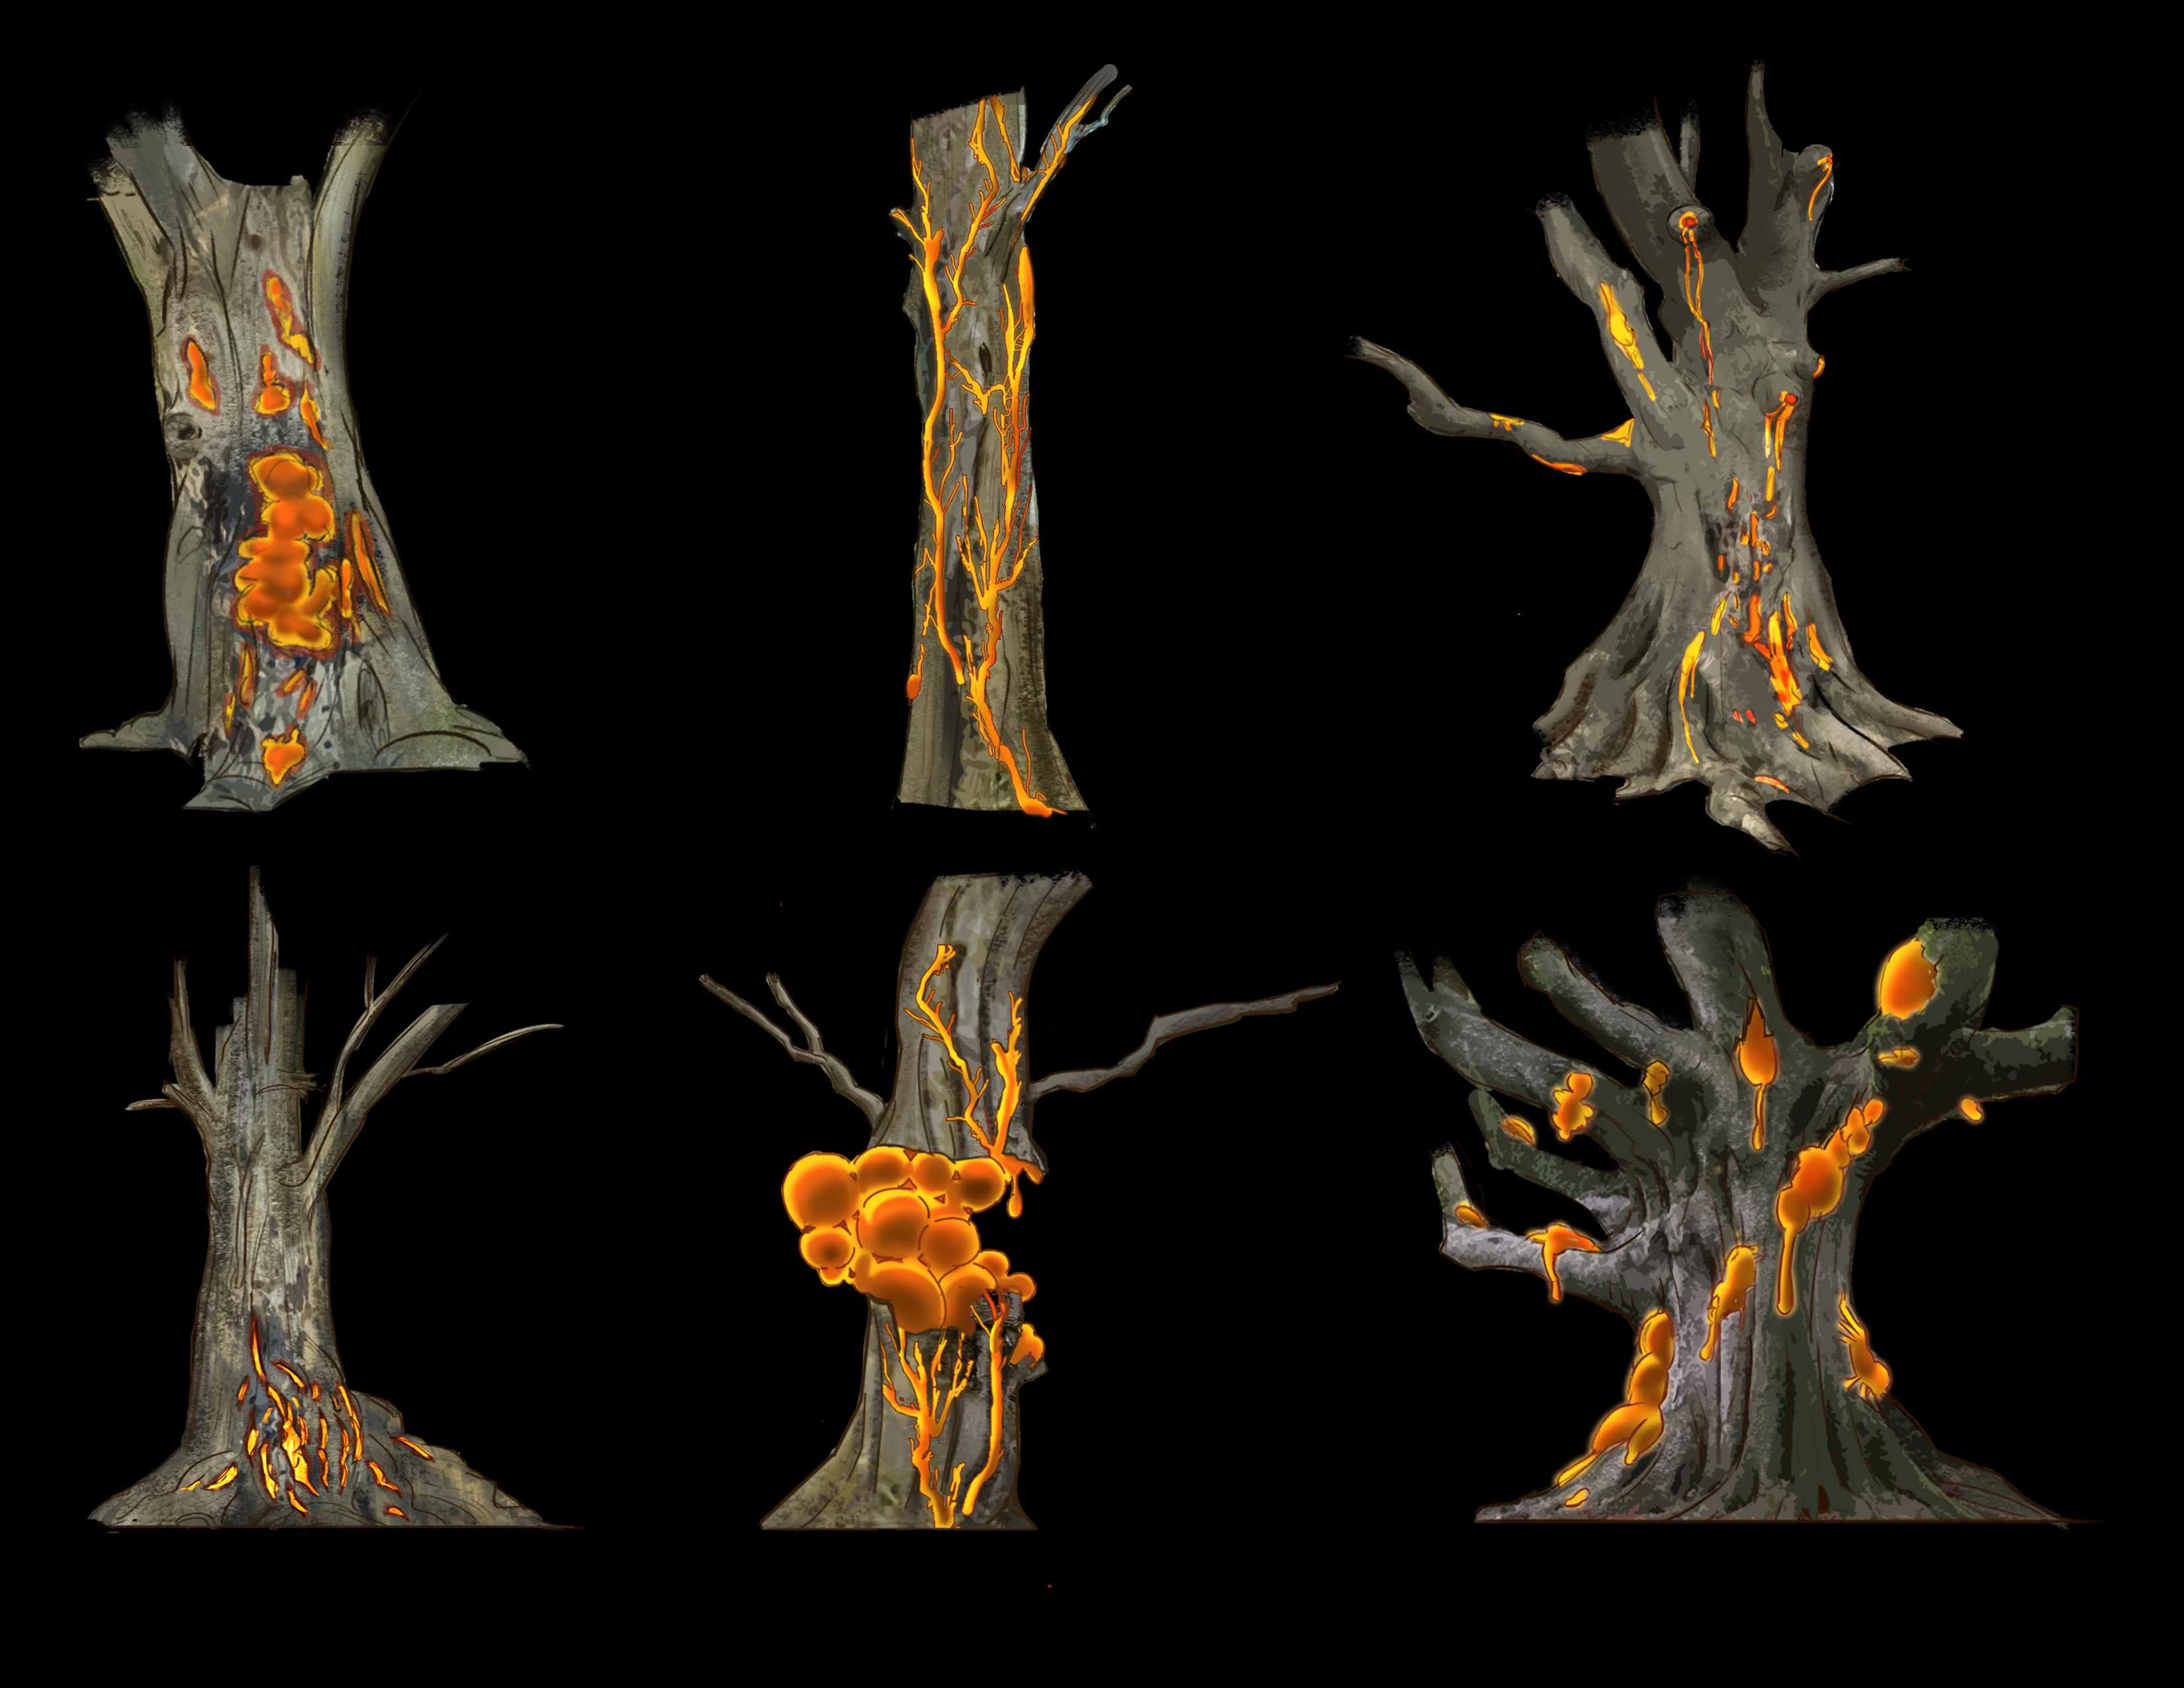 Early ideas of what a rendered version of the blight would look like, variations on how the mana blight disease could effect the tree.